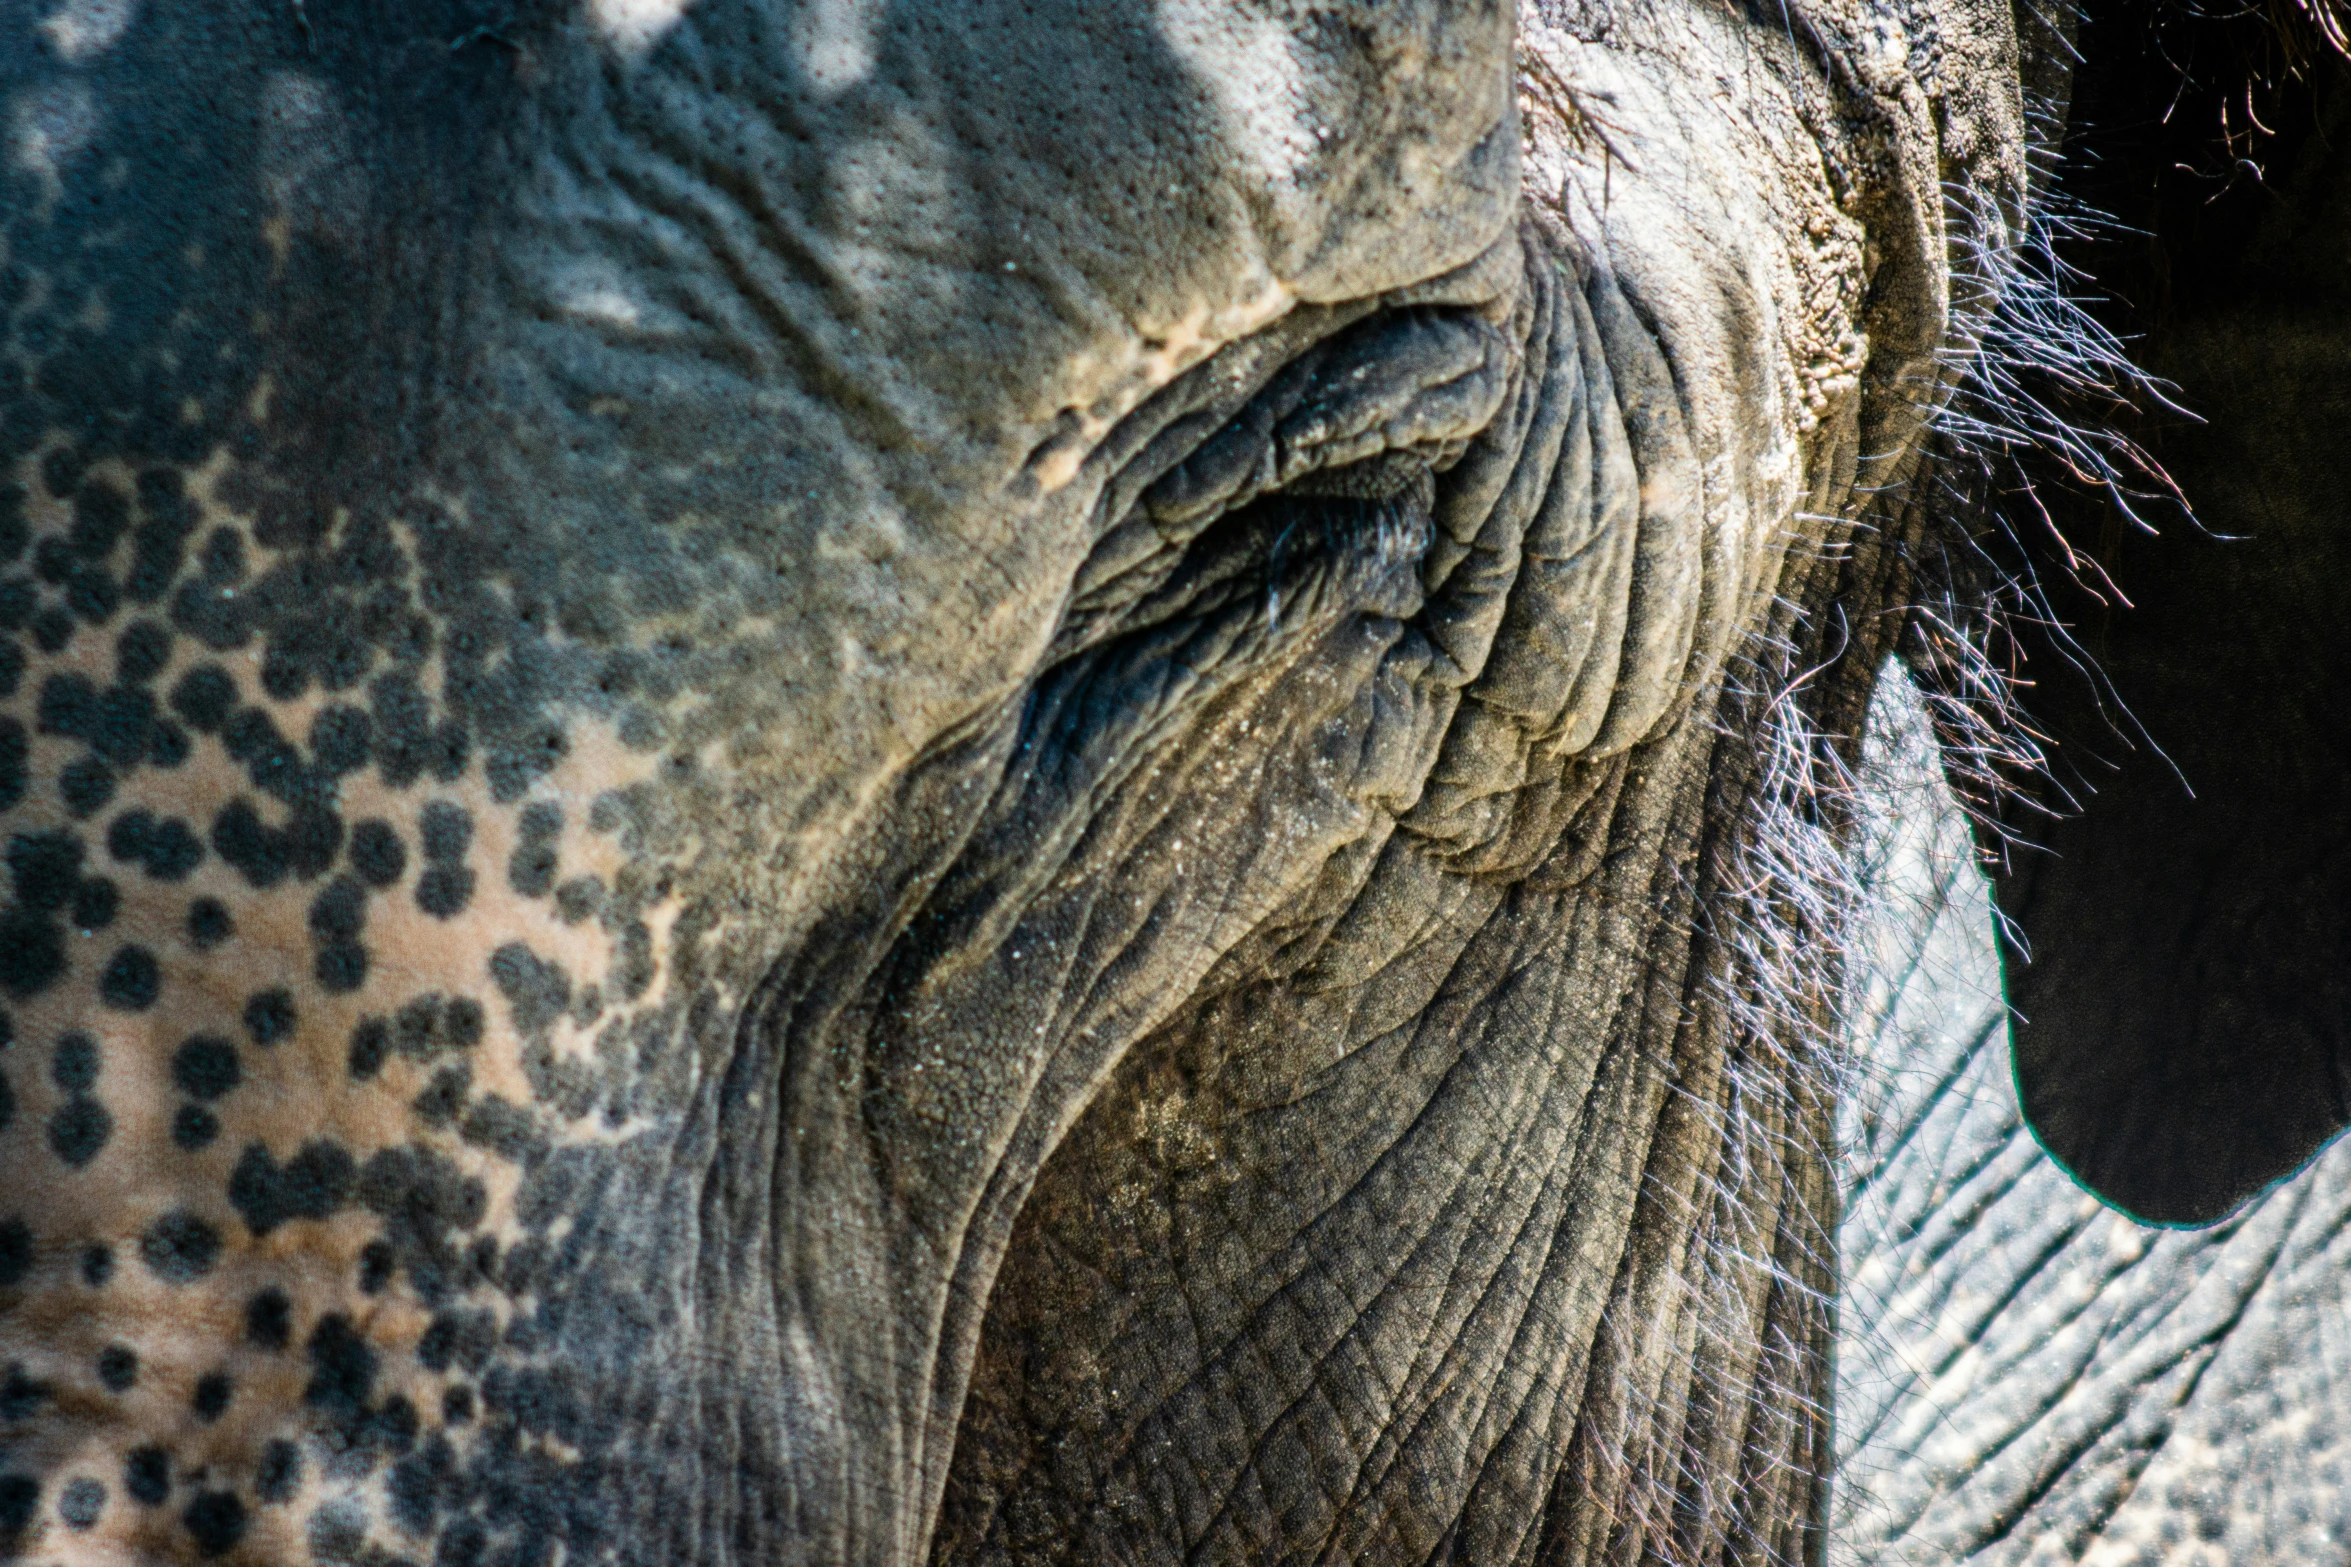 the elephant's eye and the skin are very large